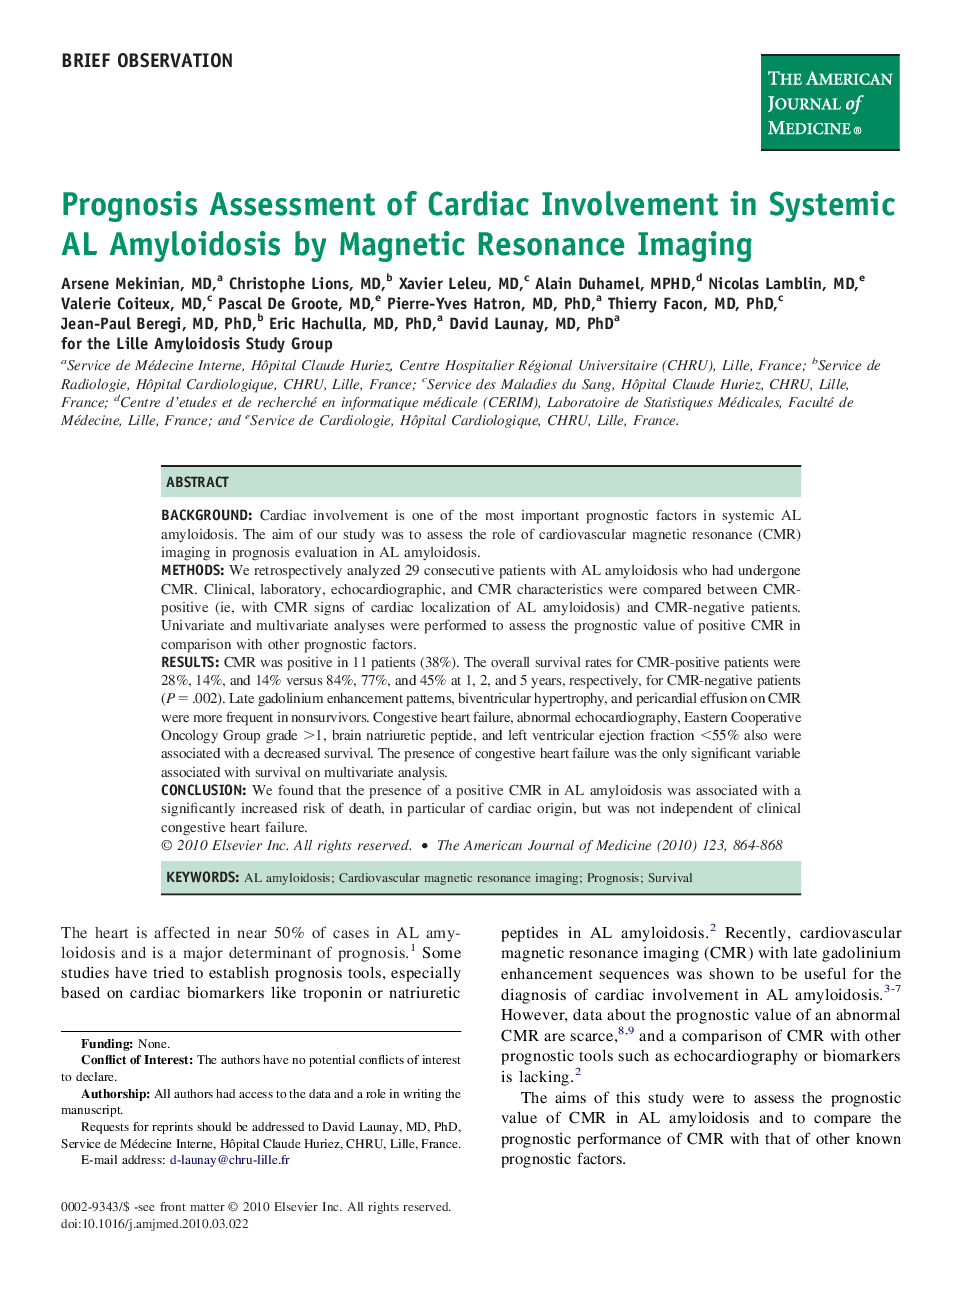 Prognosis Assessment of Cardiac Involvement in Systemic AL Amyloidosis by Magnetic Resonance Imaging 